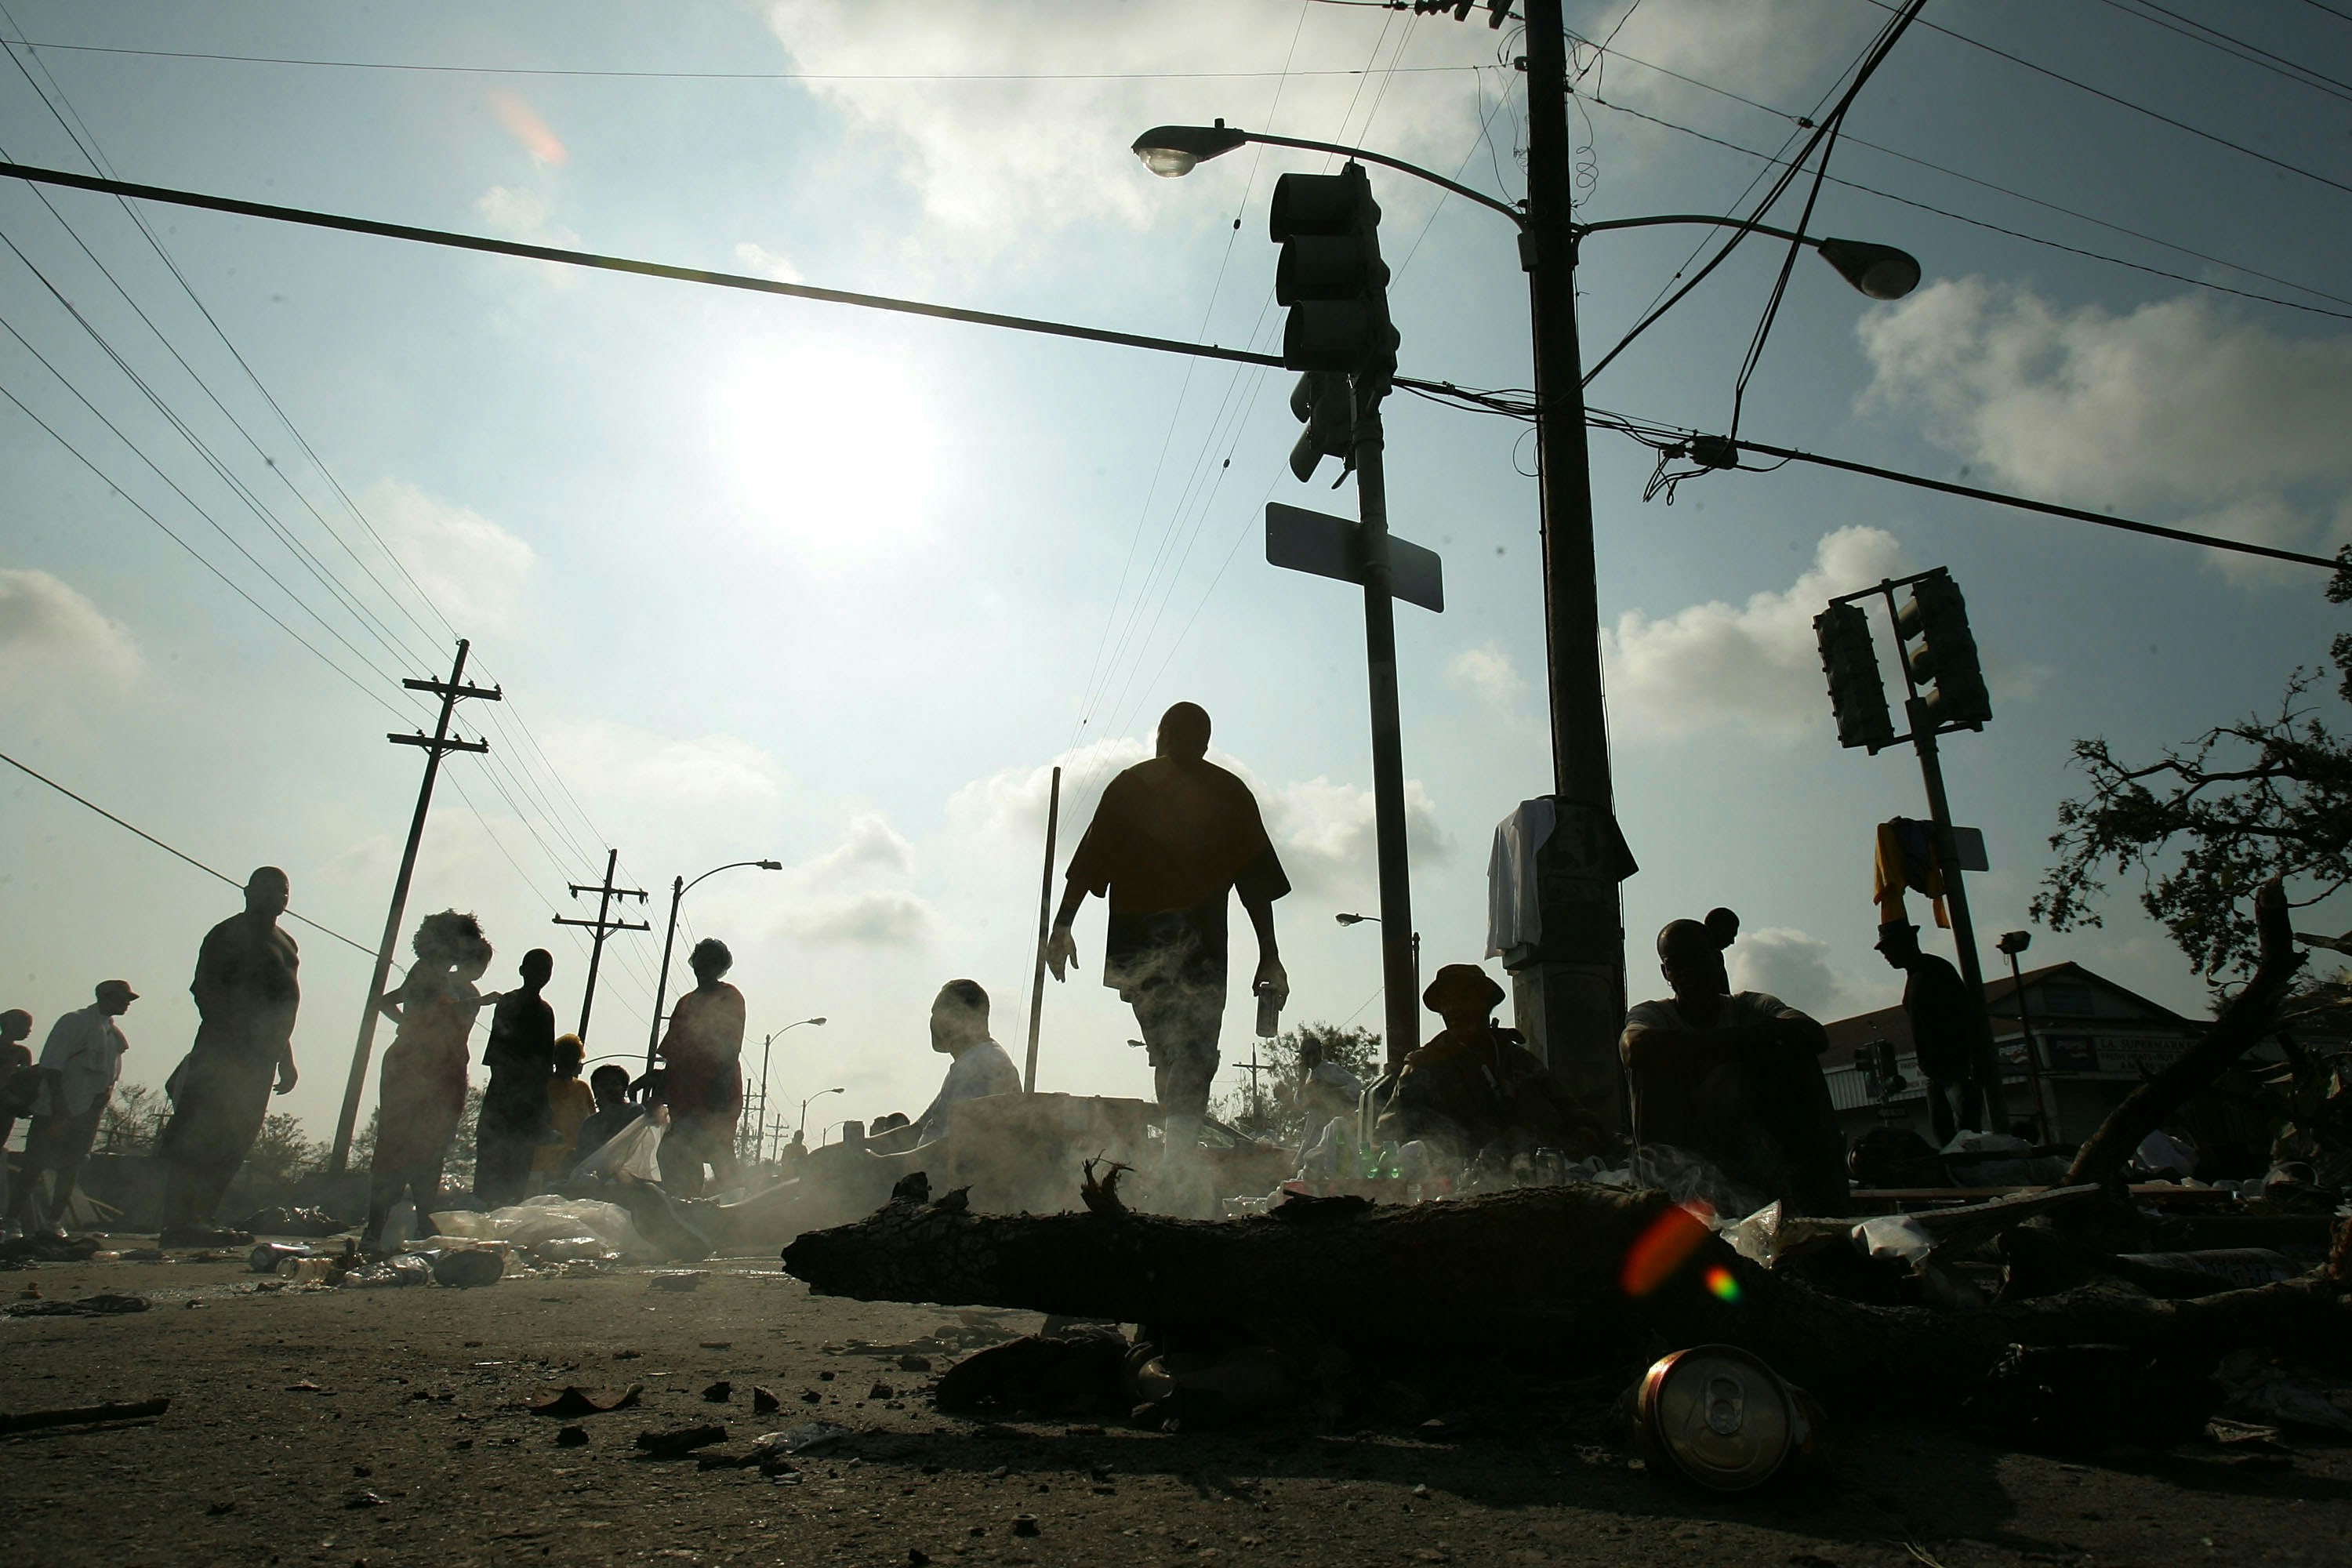 NEW ORLEANS - AUGUST 31:  People wait for assistance after being rescued from their homes a day earlier in the Ninth Ward as a small fire burns after Hurricane Katrina August 31, 2005 in New Orleans, Louisiana. Devastation is widespread throughout the city with water approximately 12 feet high in some areas. Hundreds are feared dead and thousands were left homeless in Louisiana, Mississippi, Alabama and Florida by the storm.  (Photo by Mario Tama/Getty Images)